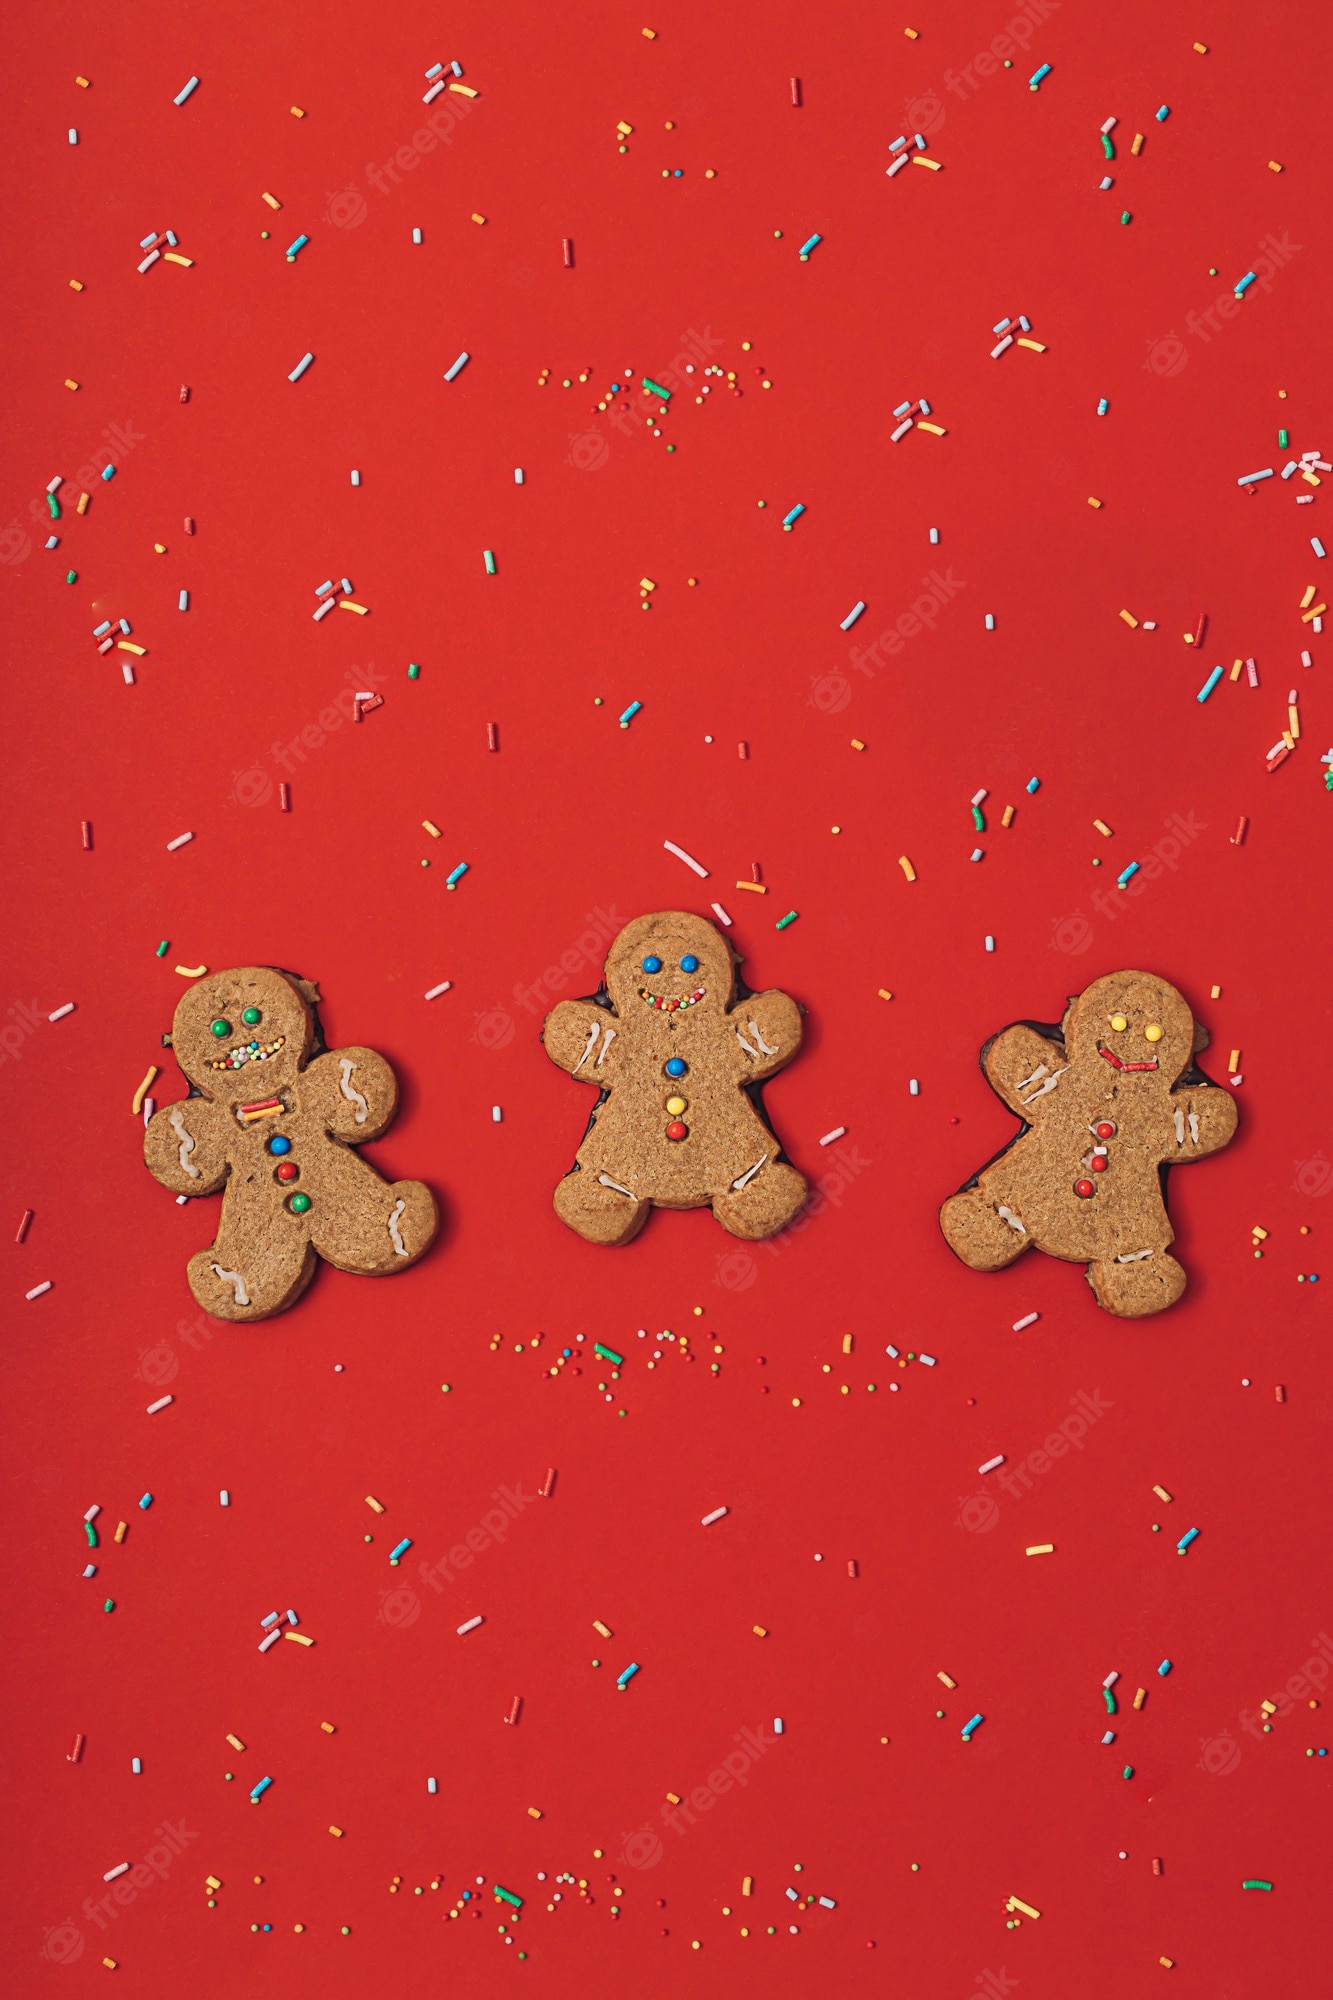 Premium Photo. Christmas gingerbread man cookie with icing, sugar sprinkles on a red table background. new year wallpaper flat lay. holiday pattern